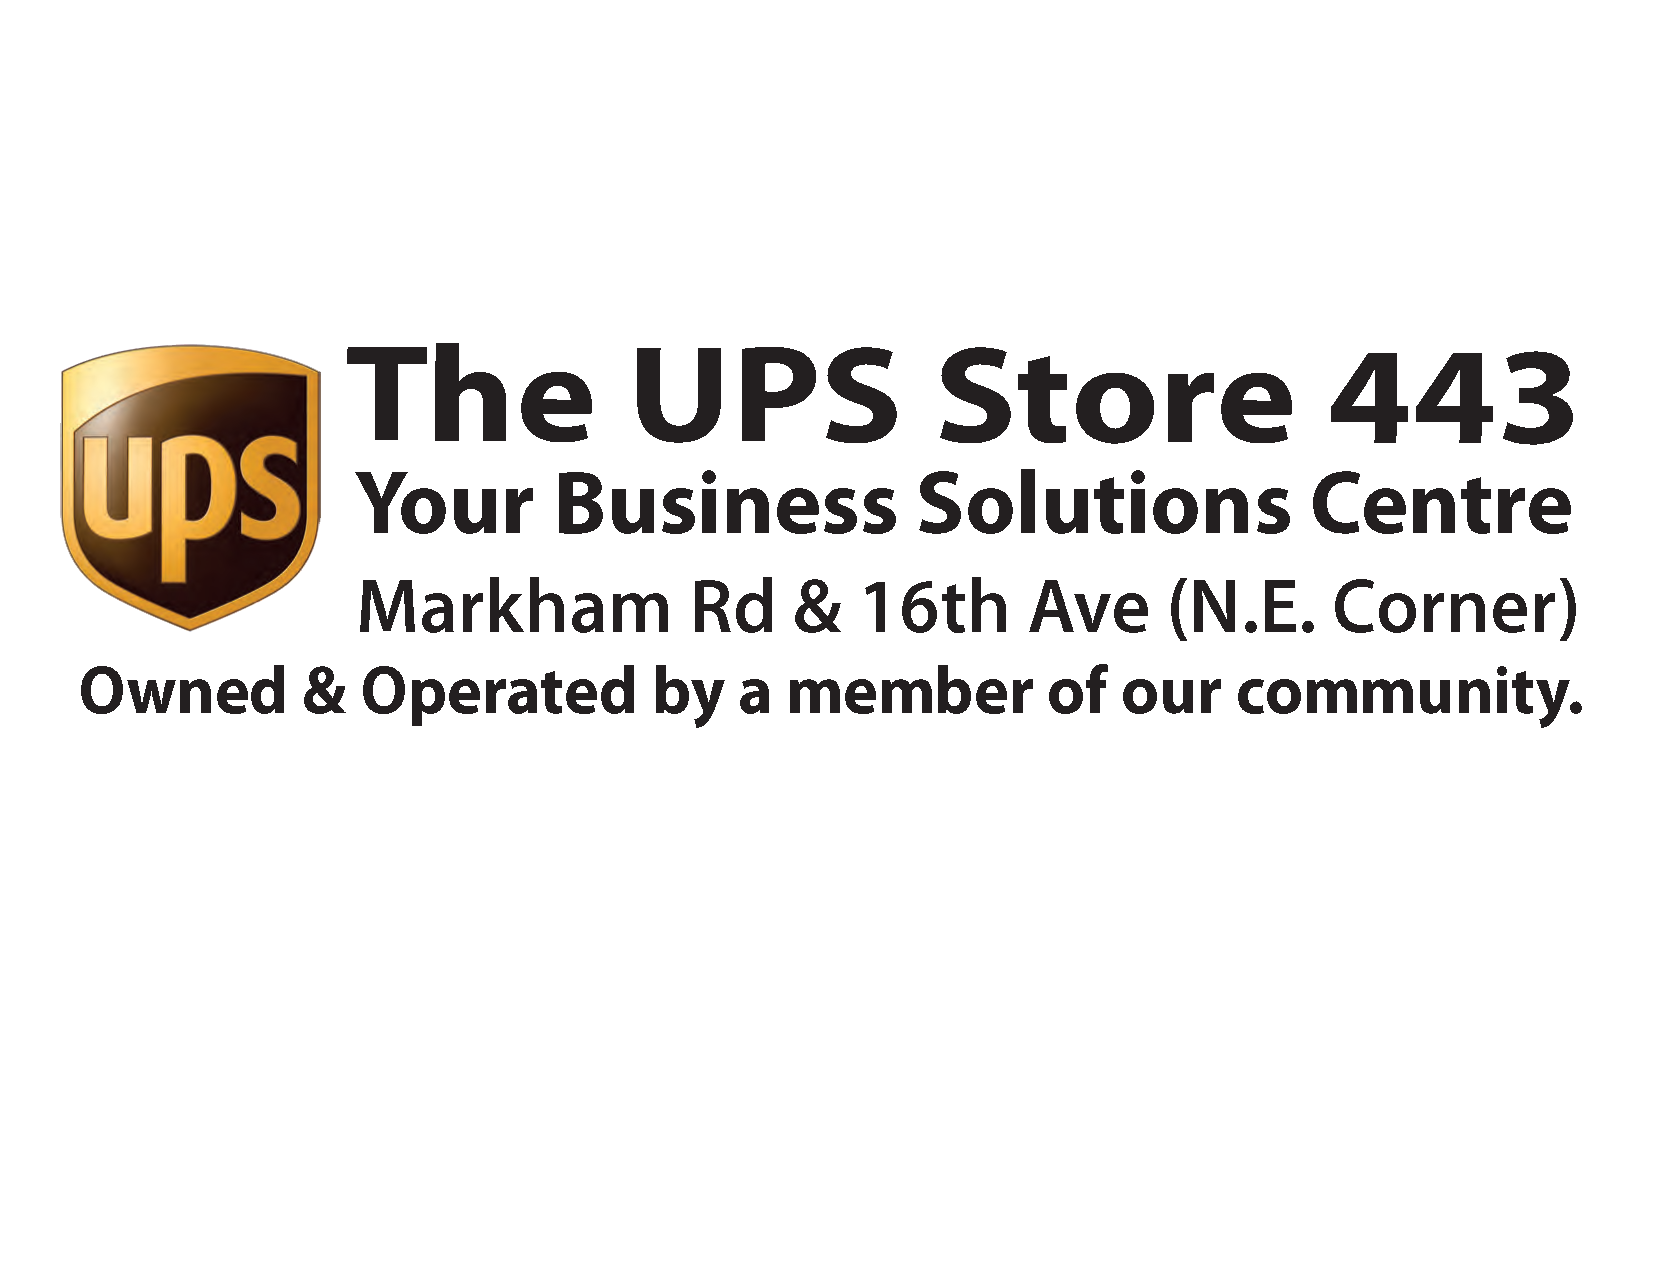 The UPS Store #443